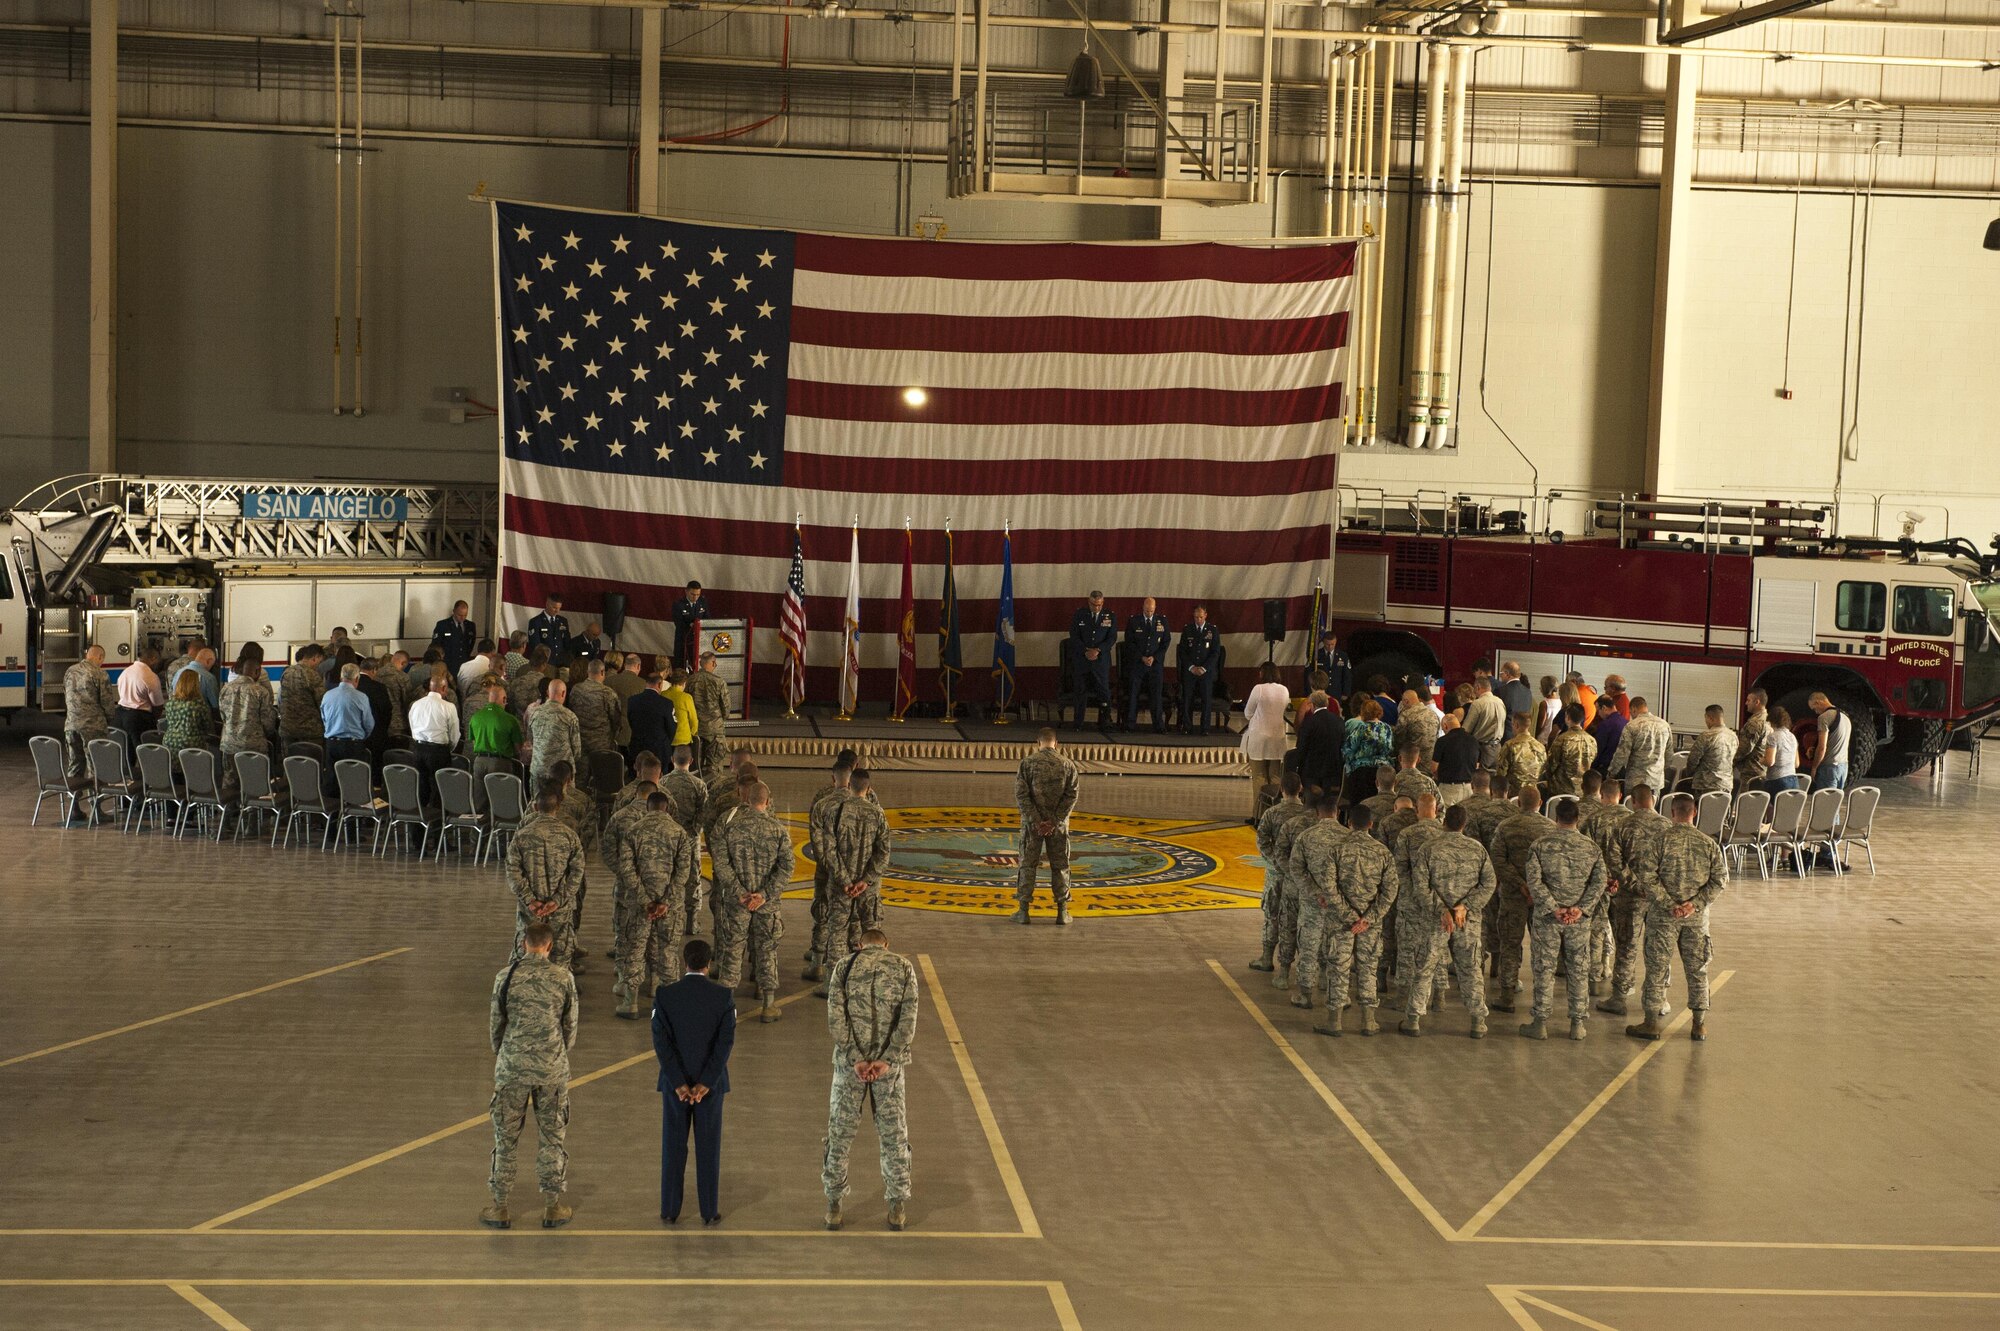 The 312th Training Squadron and visitors stand for the singing of the National Anthem during the 312th TRS change of command ceremony at the Louis F. Garland Department of Defense Fire Academy High Bay Fire Academy high bay on Goodfellow Air Force Base, Texas, July 10, 2017. The ceremony bid farewell to the previous commander, Lt. Col. Matthew Welling and welcomed the new commander, Lt. Col. Scott D. Cline. (U.S. Air Force photo by Senior Airman Scott Jackson/Released)